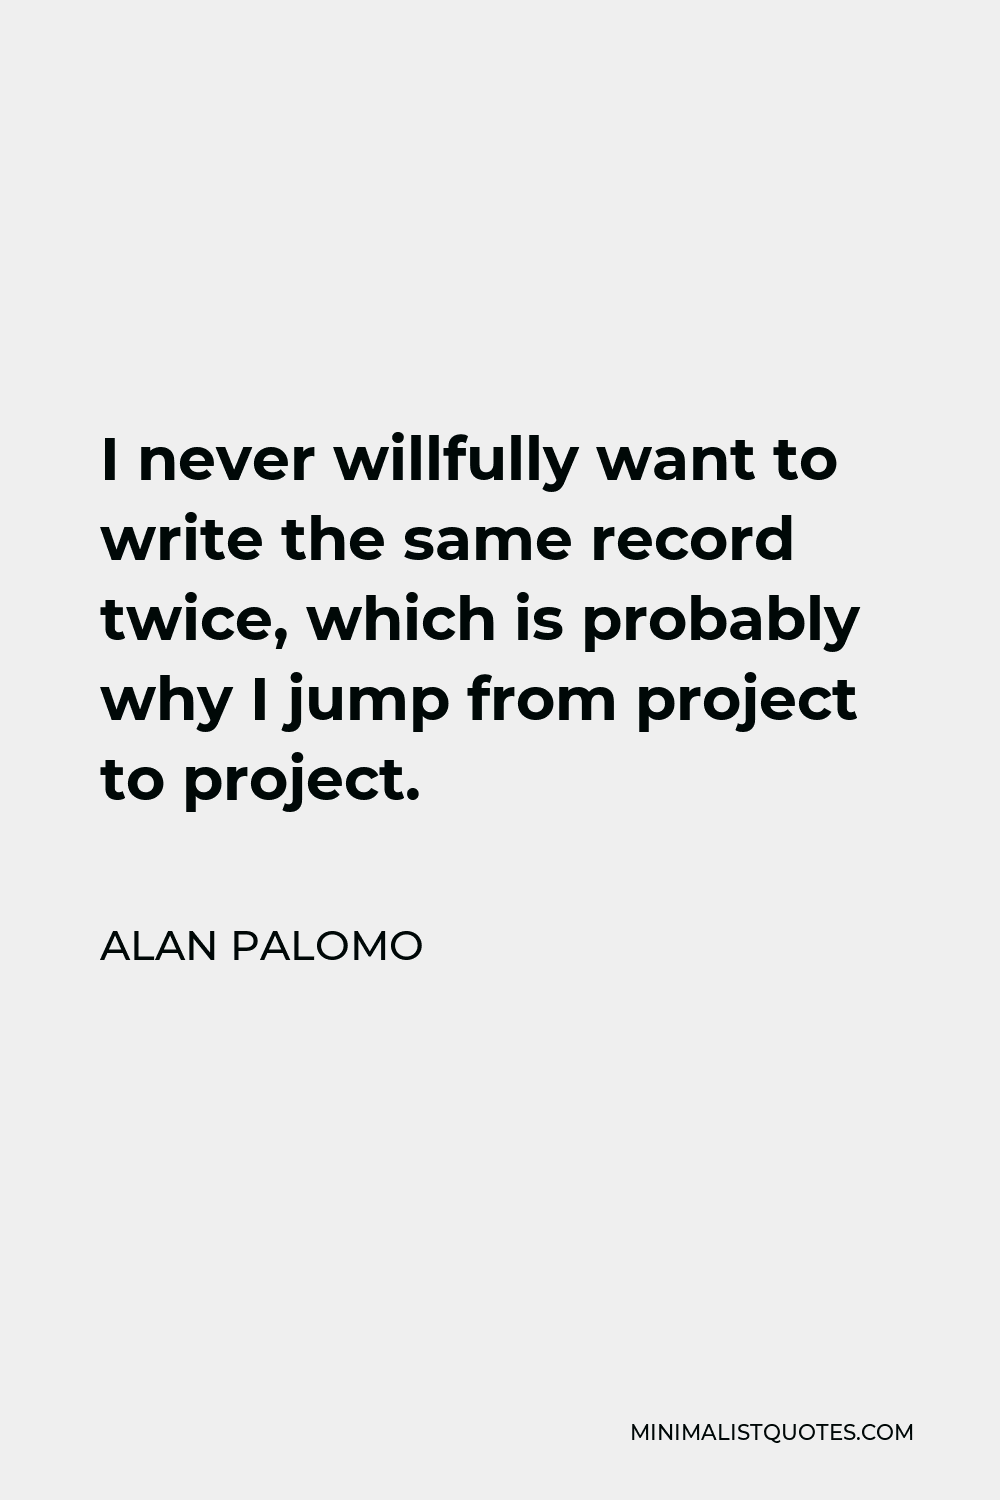 Alan Palomo Quote - I never willfully want to write the same record twice, which is probably why I jump from project to project.